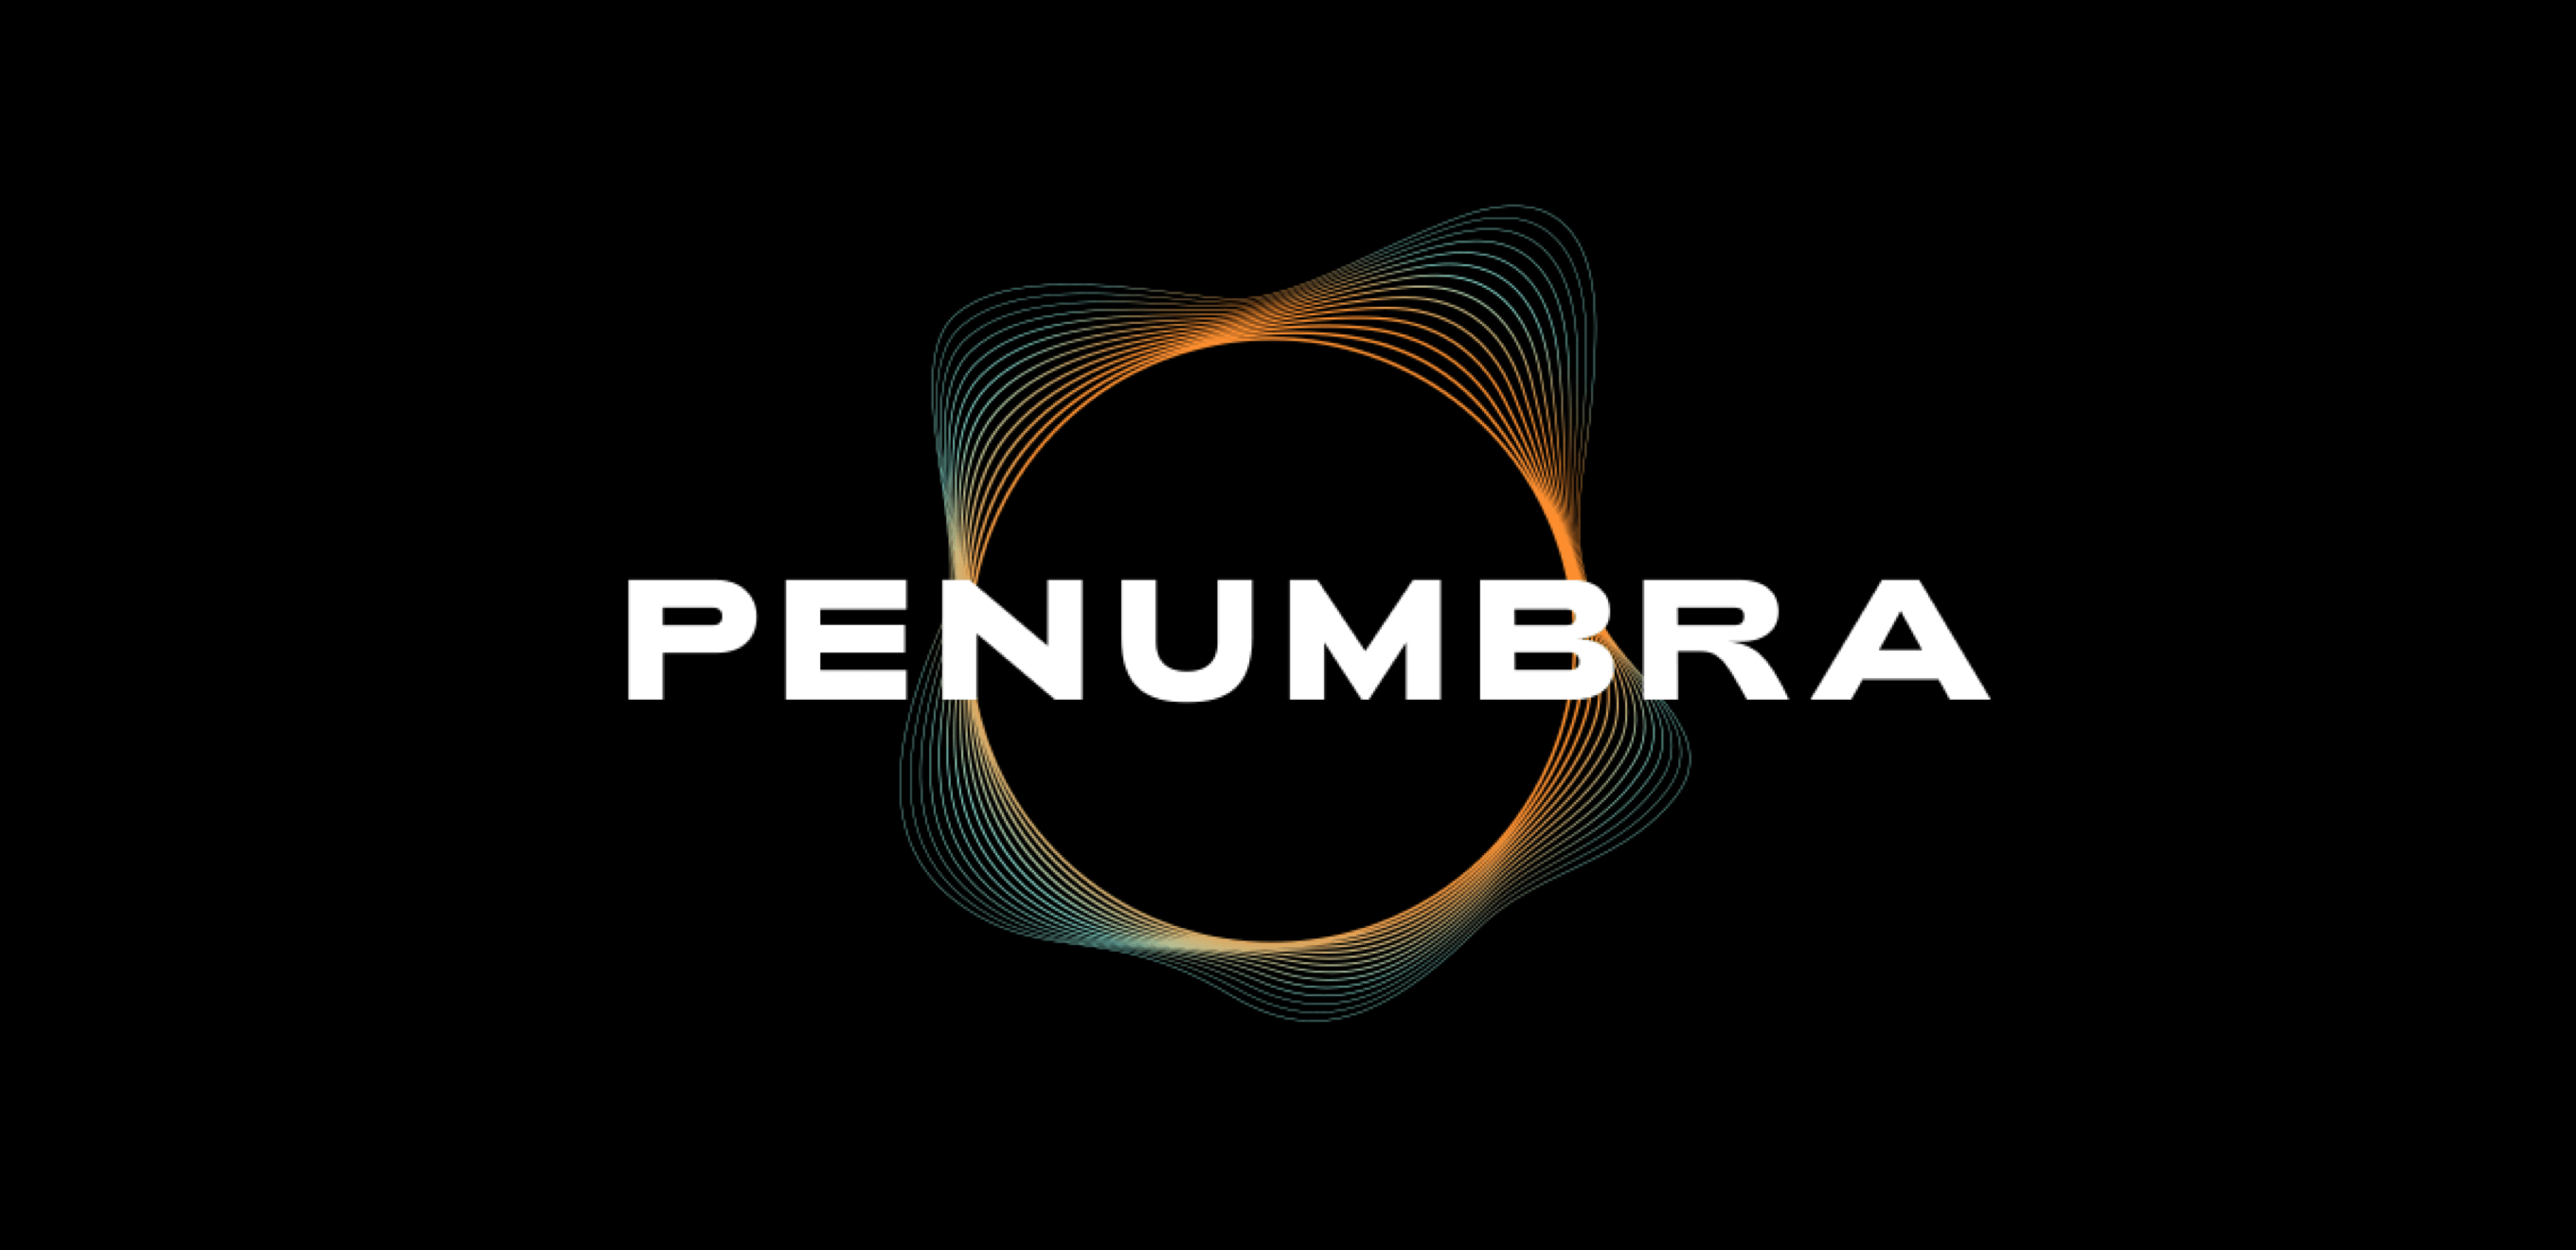 Graphic identity creation for Penumbra